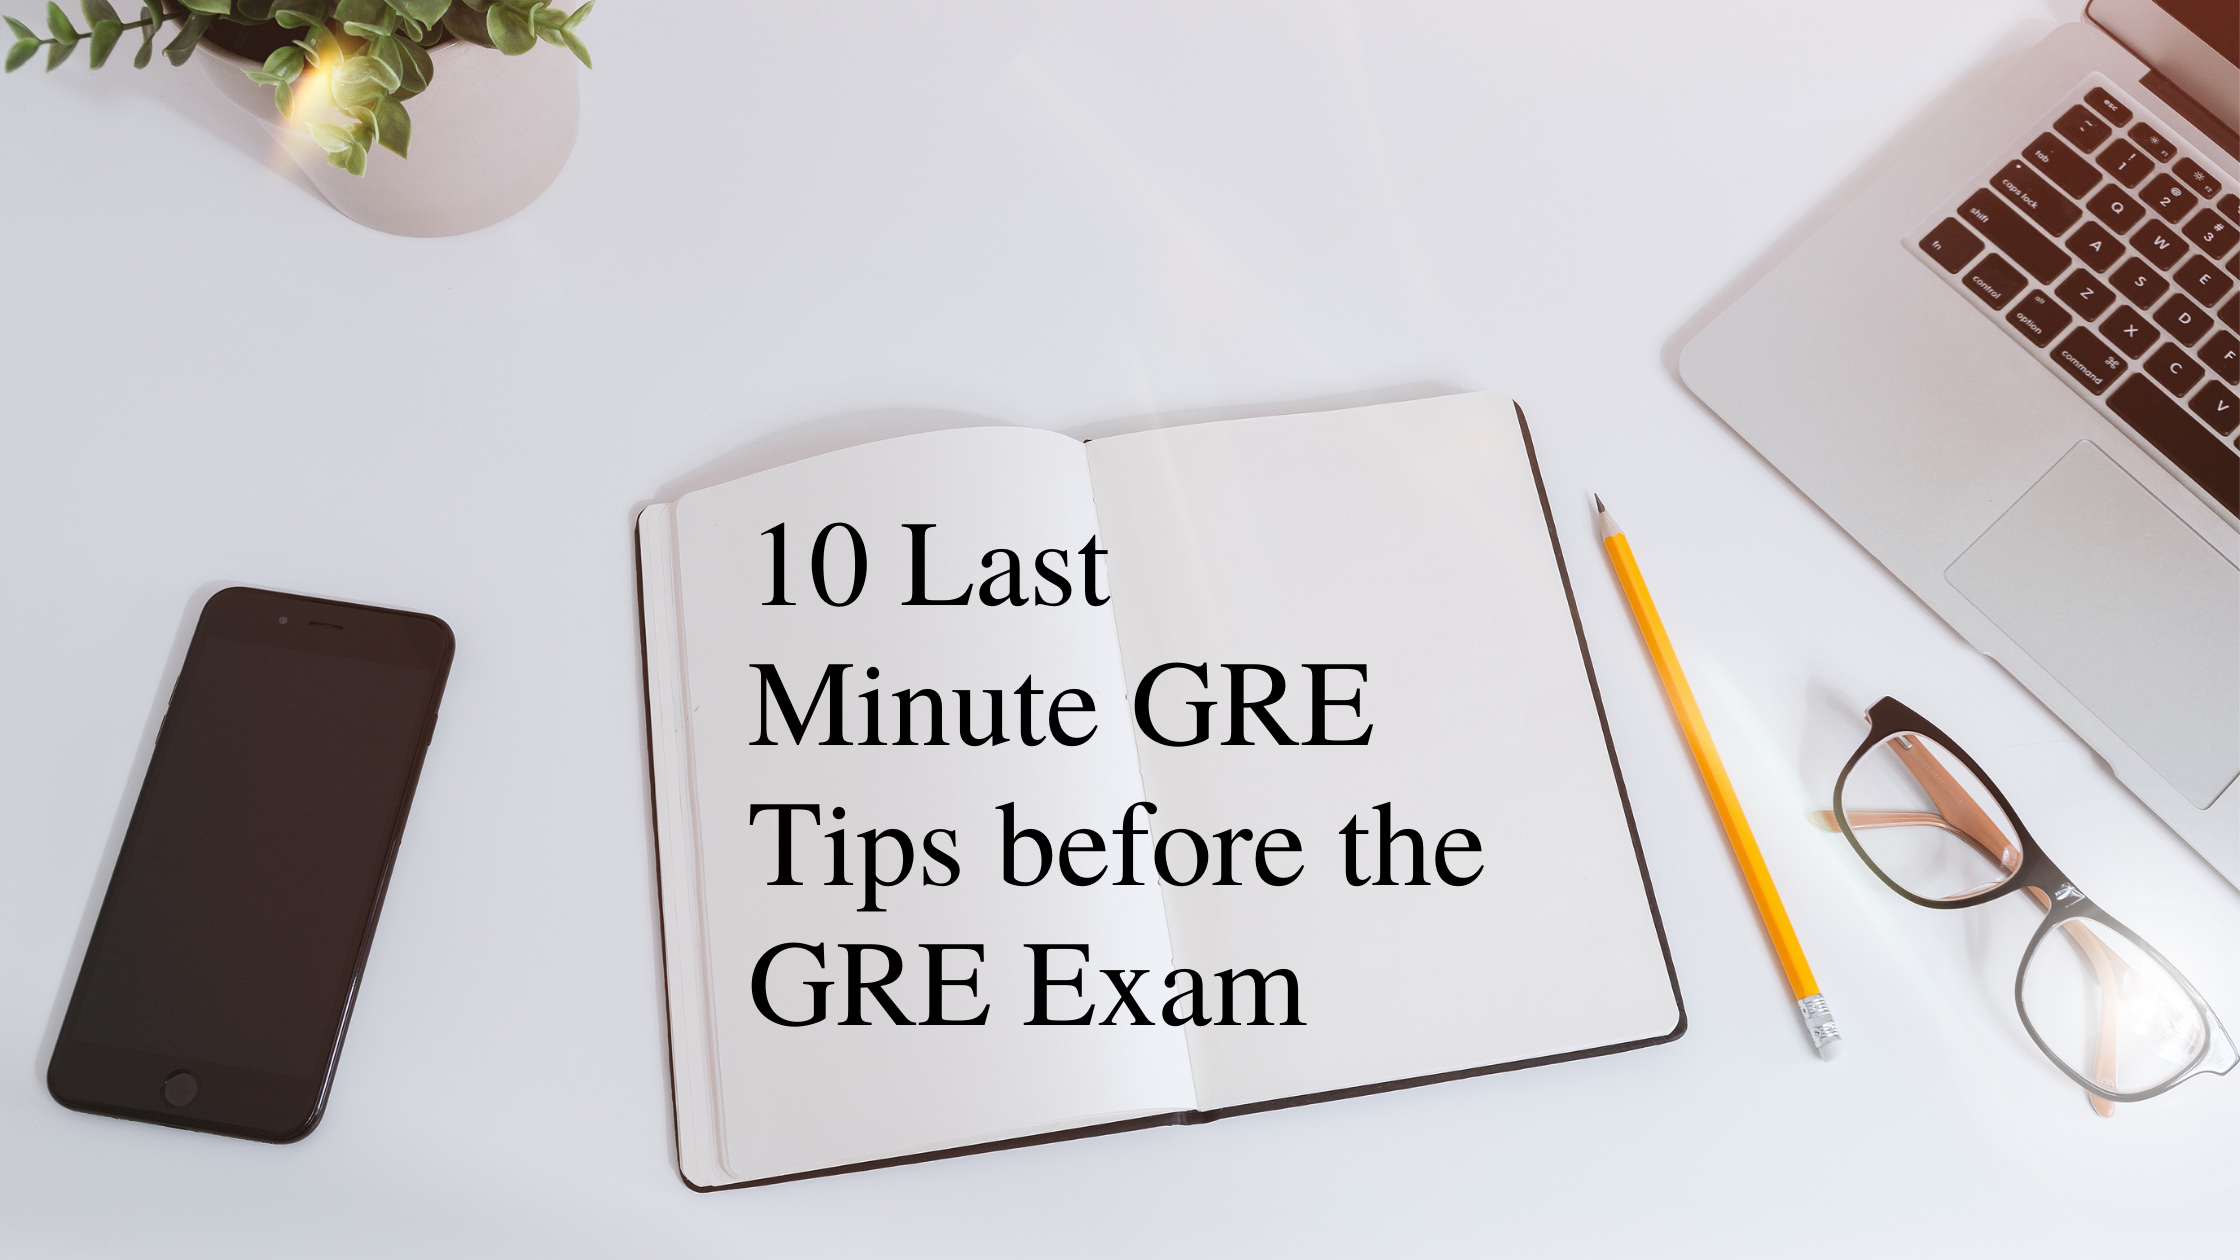 10 Last Minute GRE Tips before the GRE Examination